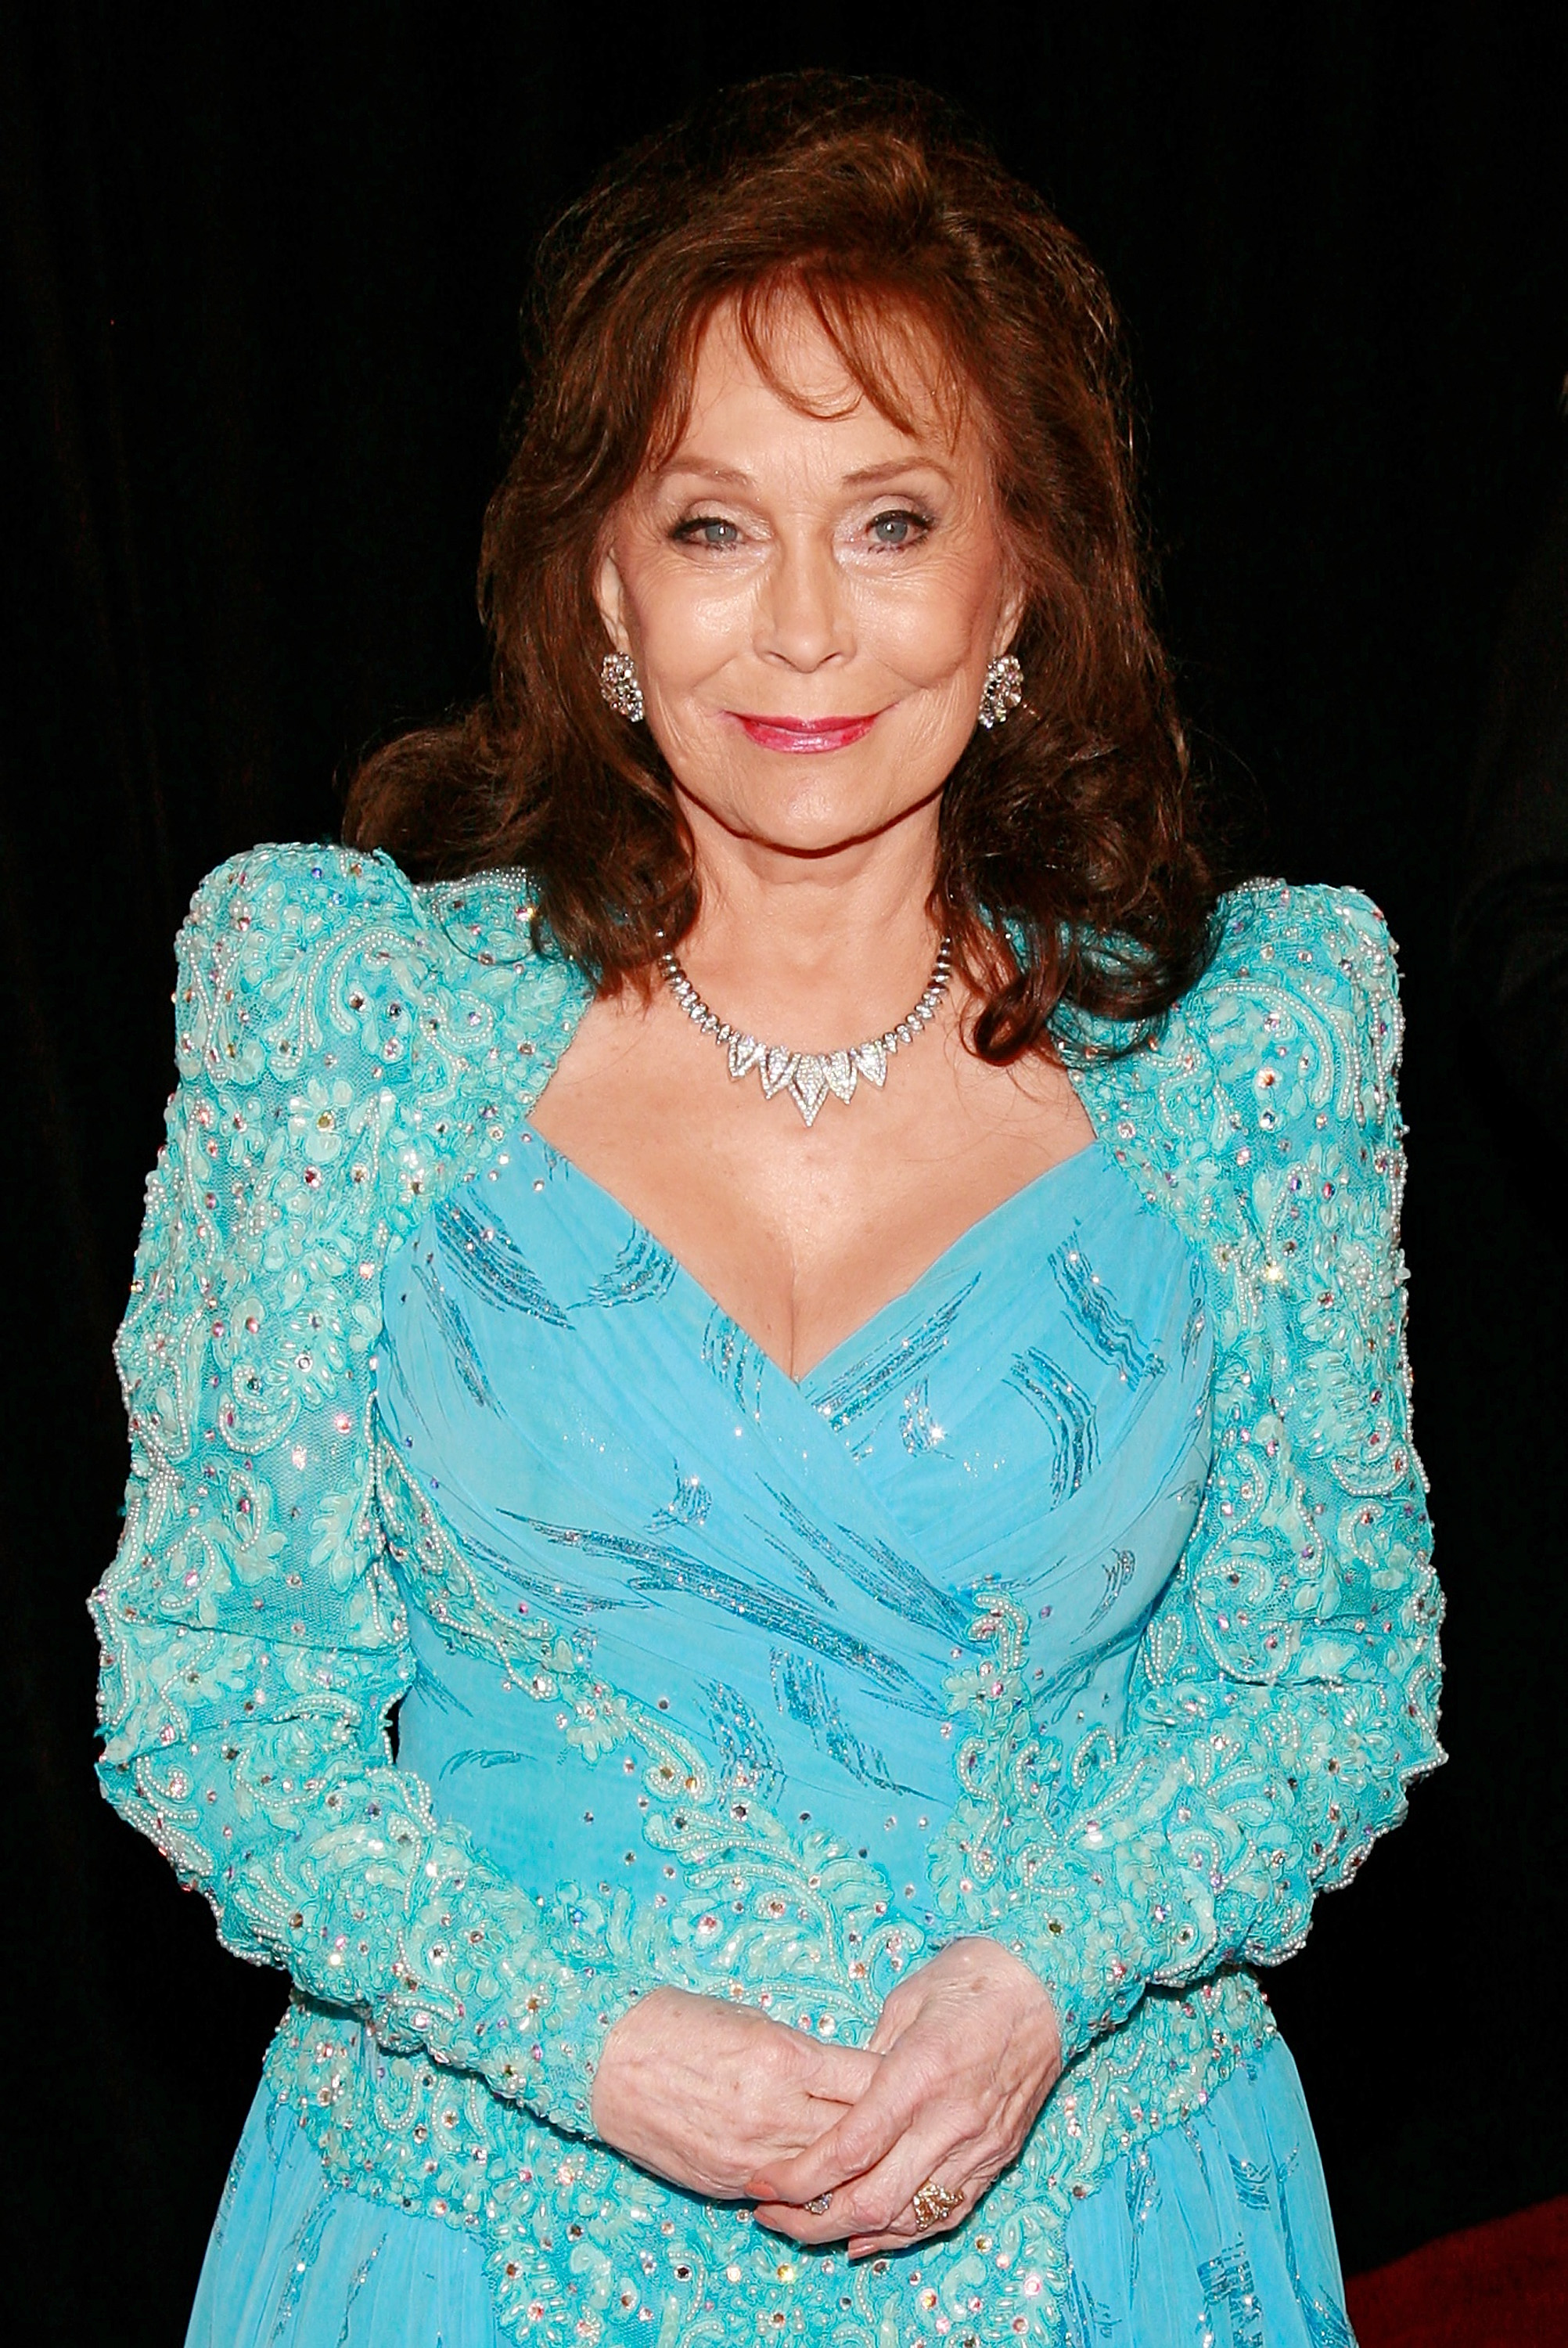 Loretta Lynn arrives at the 39th Annual Songwriters Hall of Fame Induction Ceremony at the Marriott Marquis in New York, on June 19, 2008. | Source: Getty Images